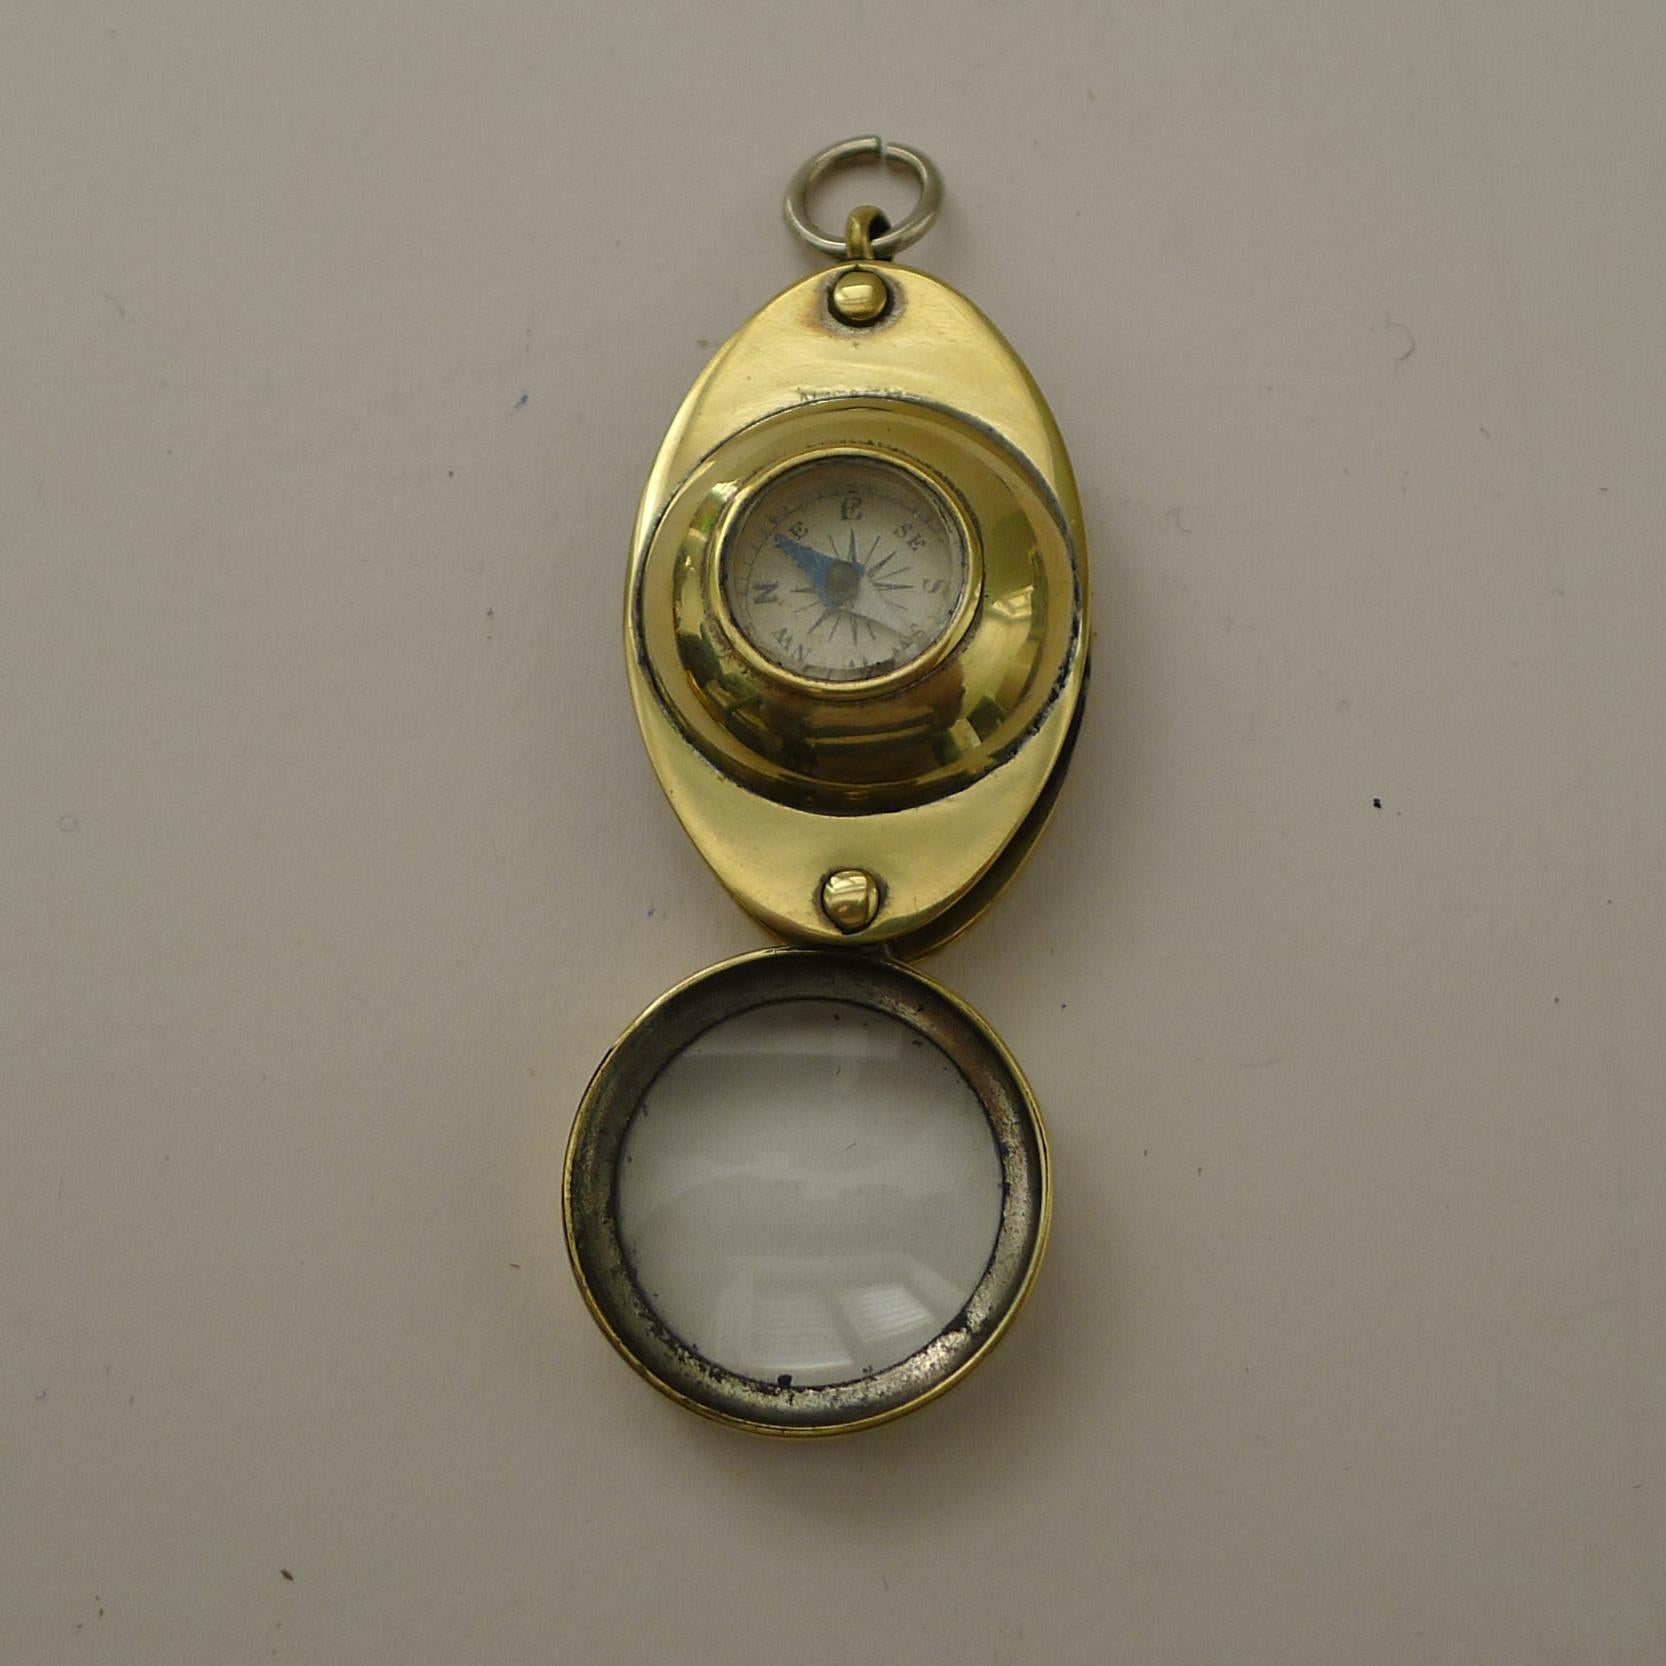 A charming little folding loop or magnifying glass made from brass, dating to the early twentieth century, c.1920.

What of course makes it highly collectable is the inset working compass. A novelty piece in excellent condition. 1 7/8